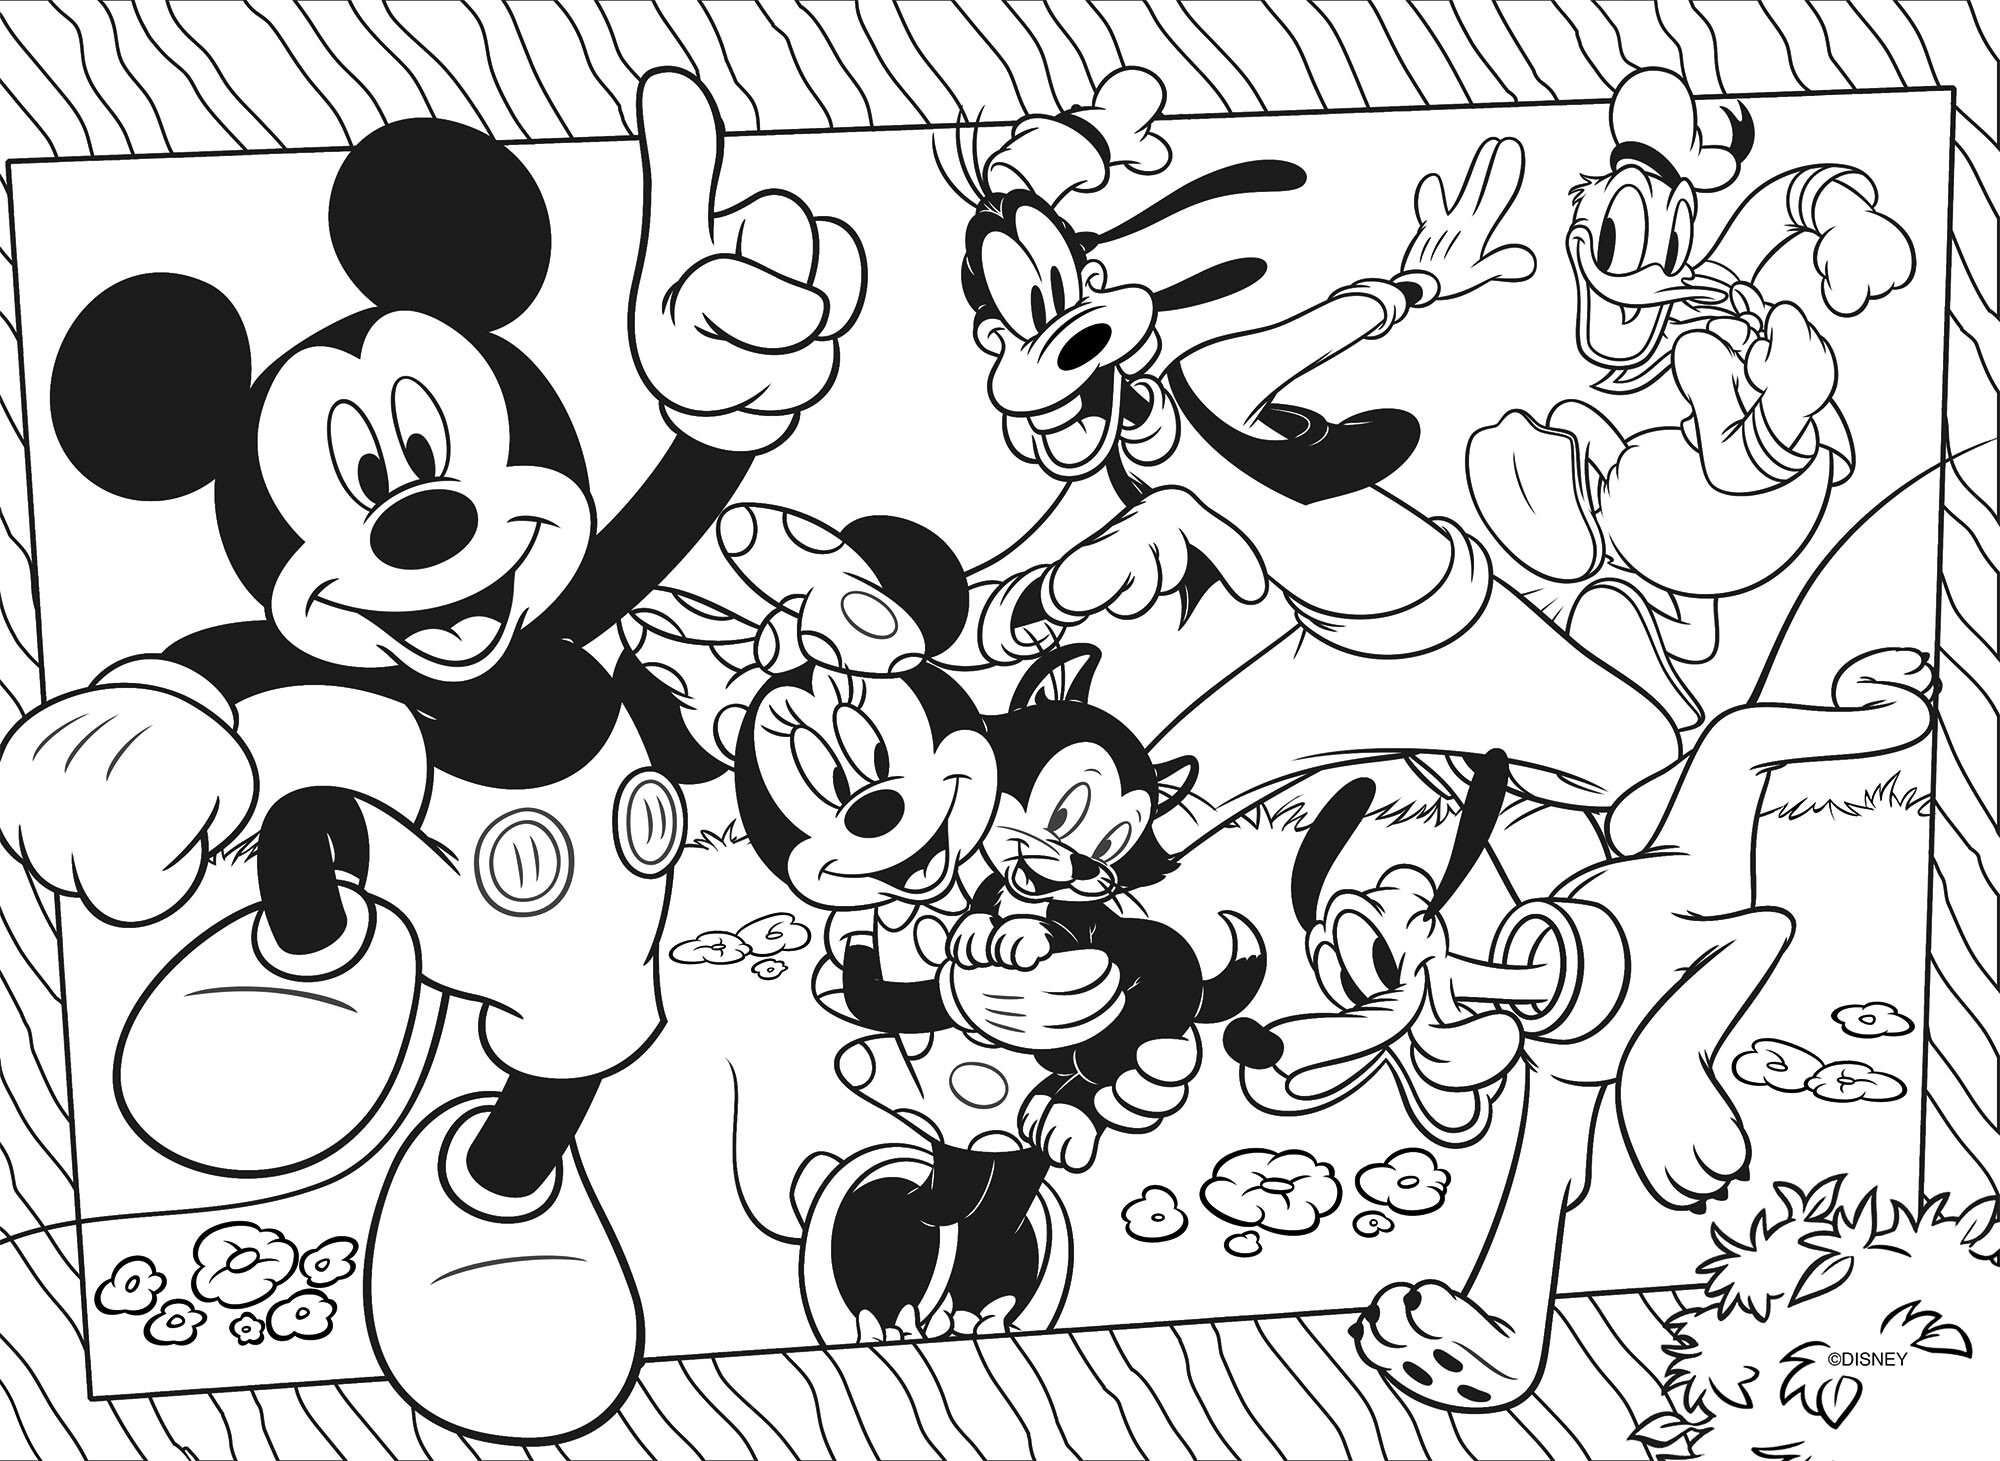 Disney eco-puzzle df mickey mouse 60 - LISCIANI, Mickey Mouse